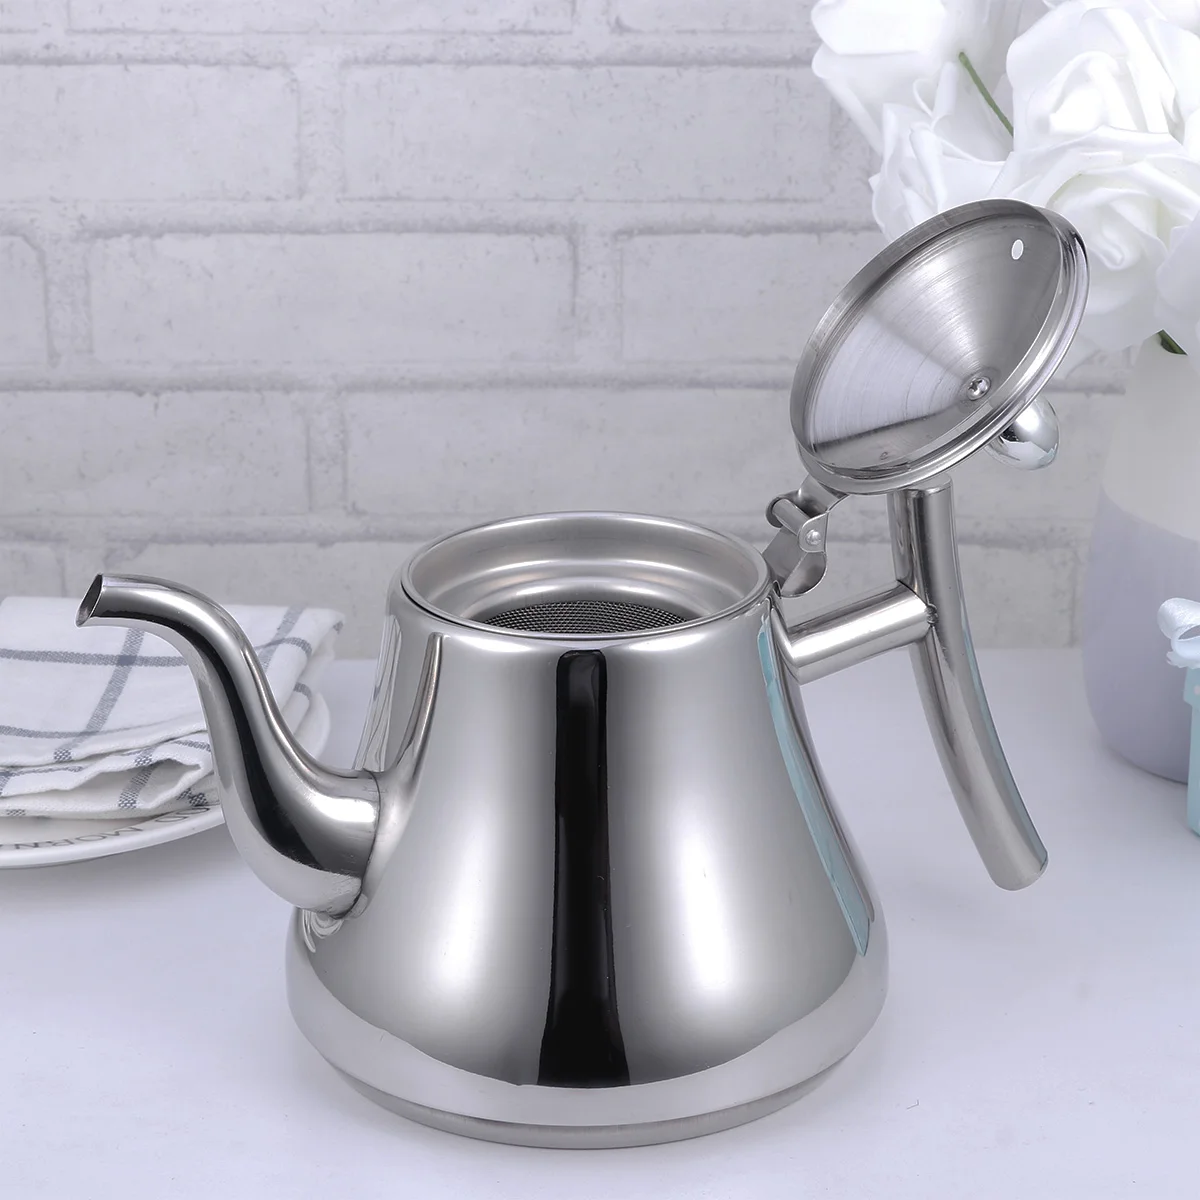 

Teapot with Infuser Vacuum Water Pot Silver Teapot Insulated Water Pot Water Kettle Stovetop Stainless Steel Tea Kettle